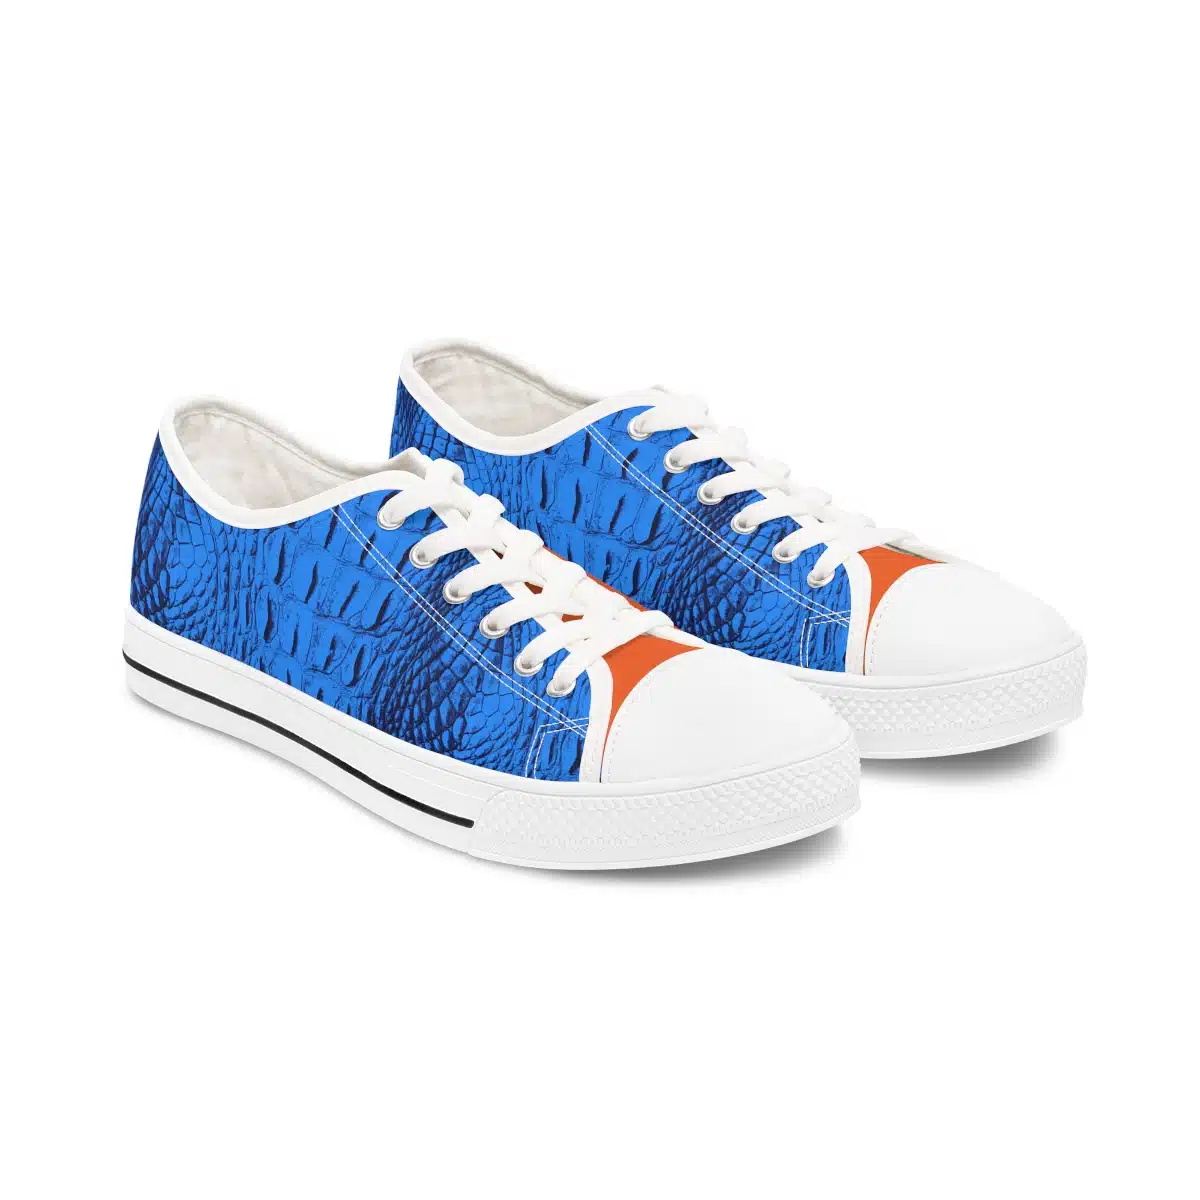 Featured image for “Women's Low Top Sneakers”